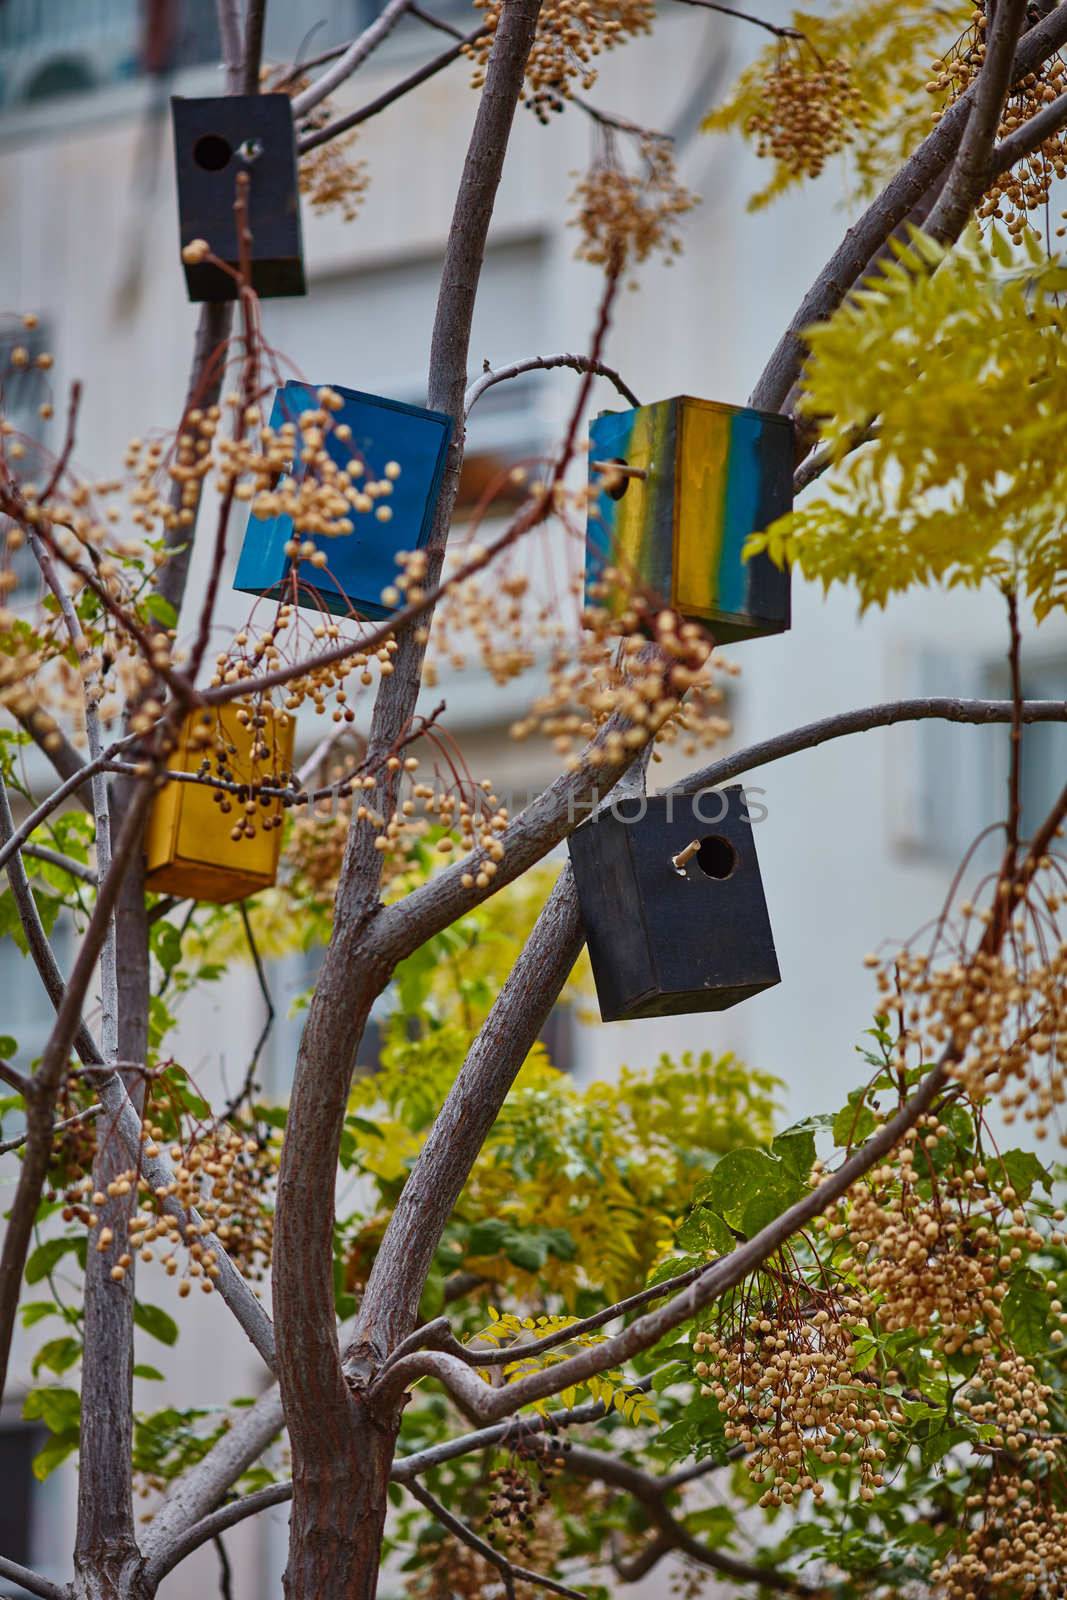 Many colorful bird houses on the tree